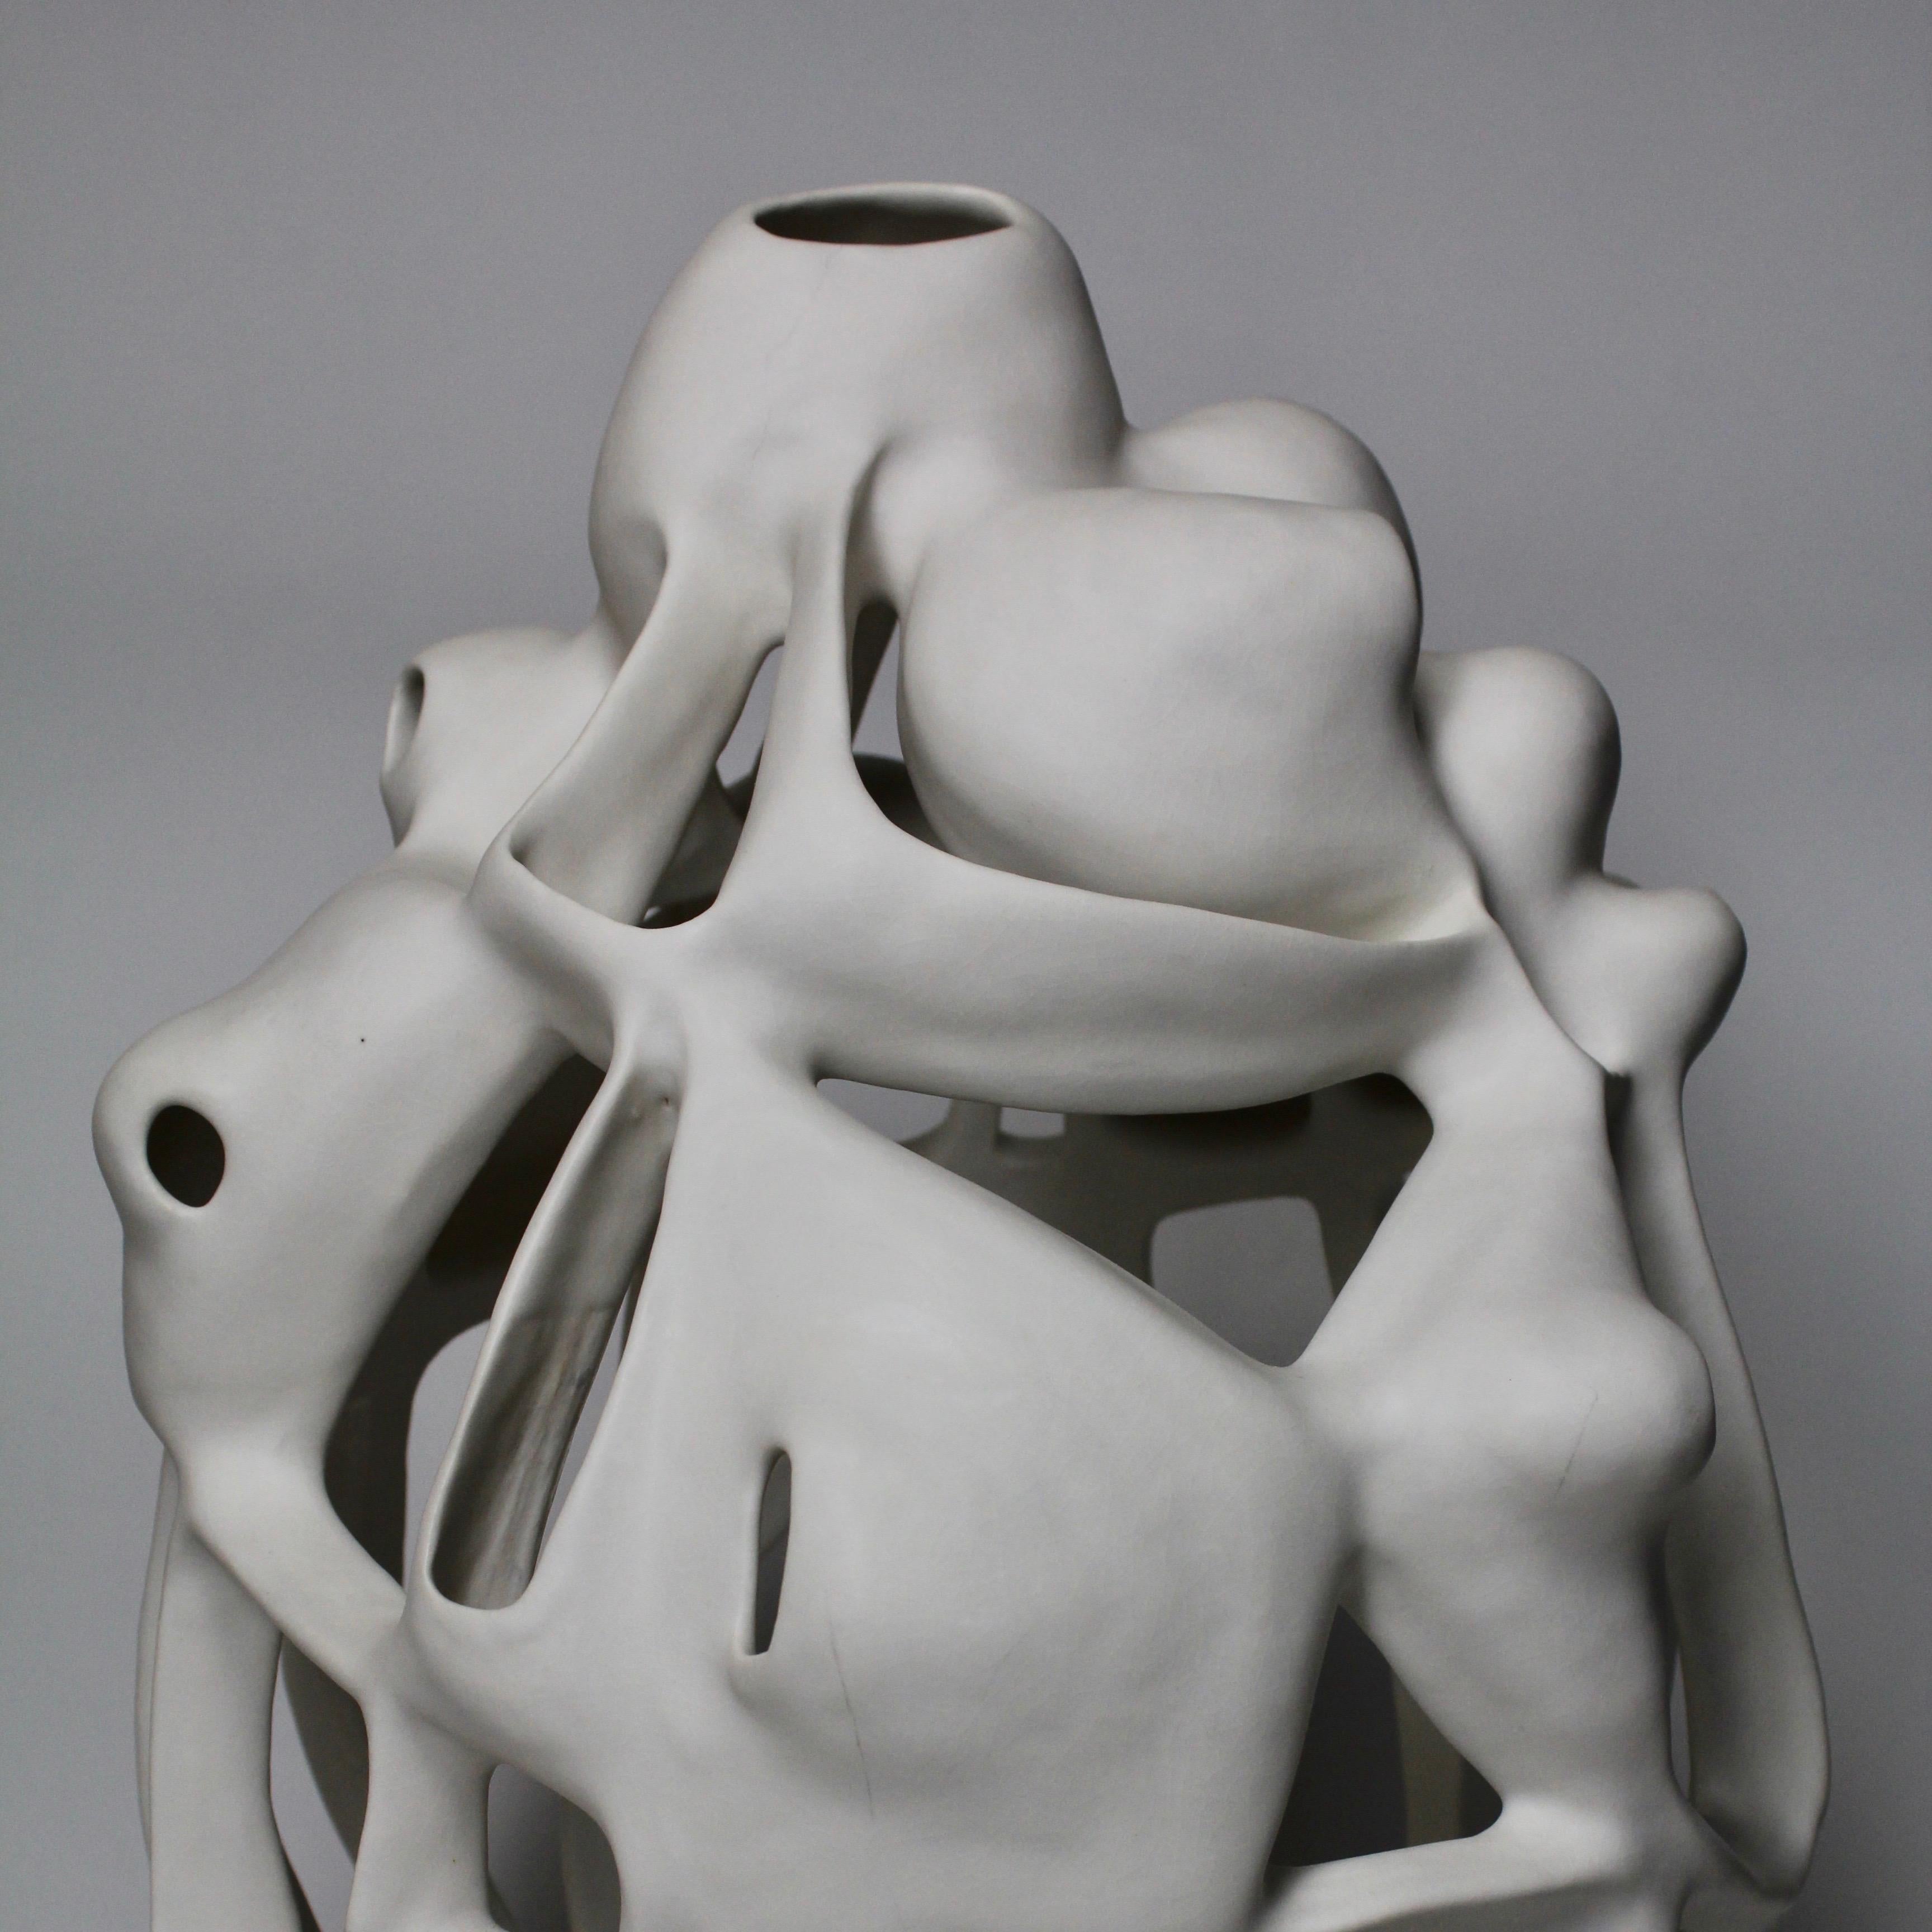 Untitled #3780 - Porcelain geometric white sculpture  - Sculpture by Joan Lurie